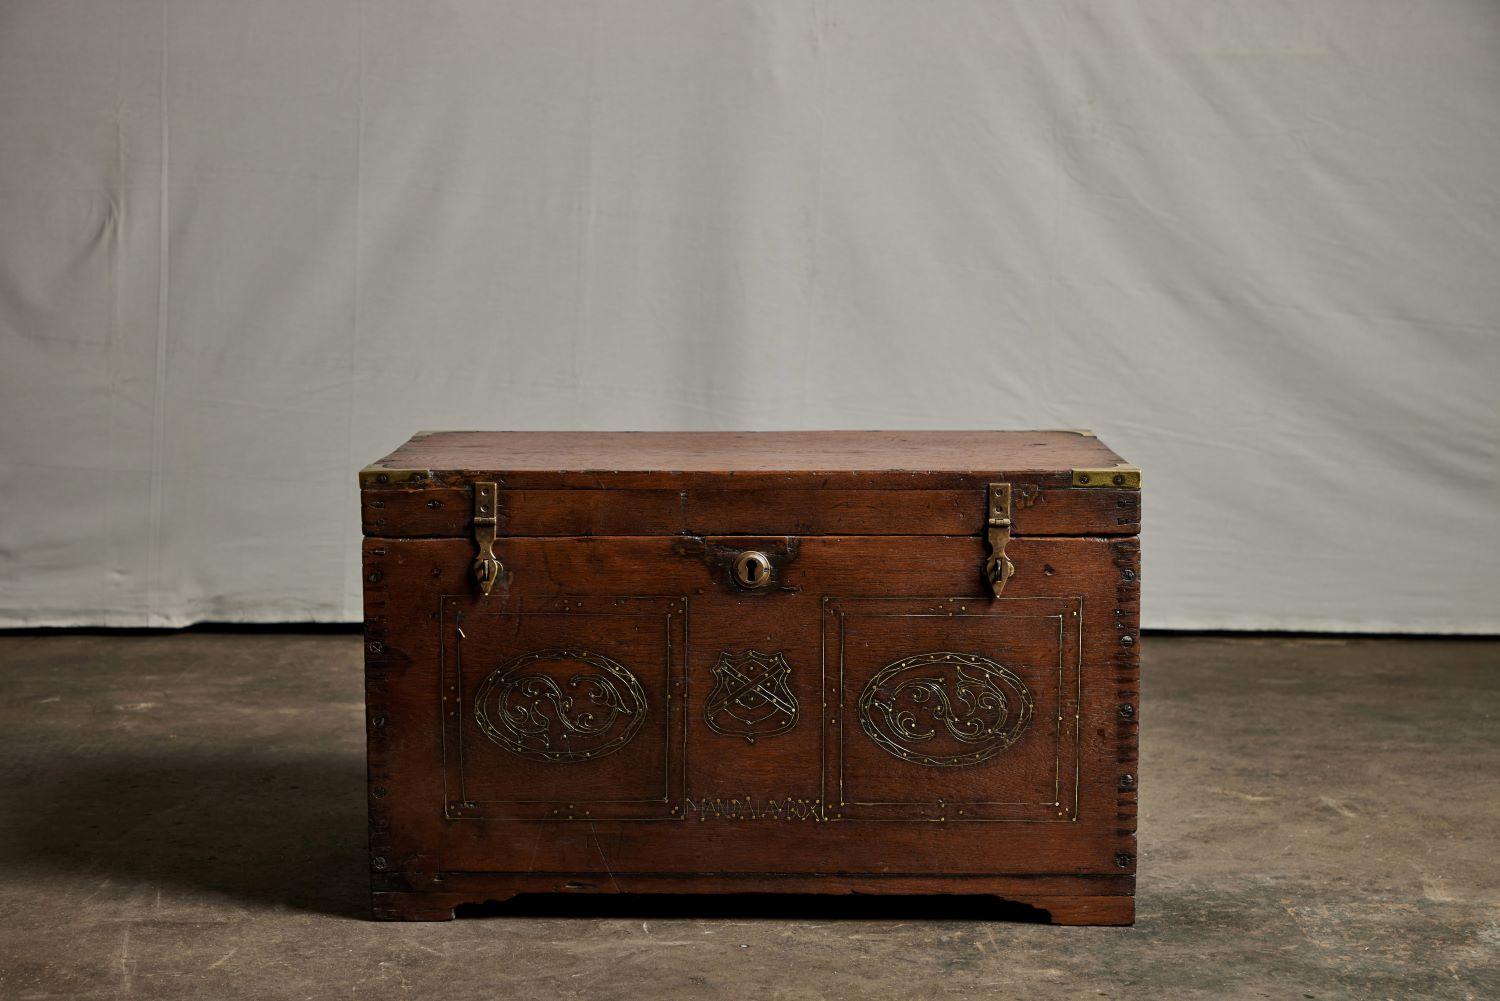 A Burmese ladies' teak make up trunk, inlaid with brass. The words 